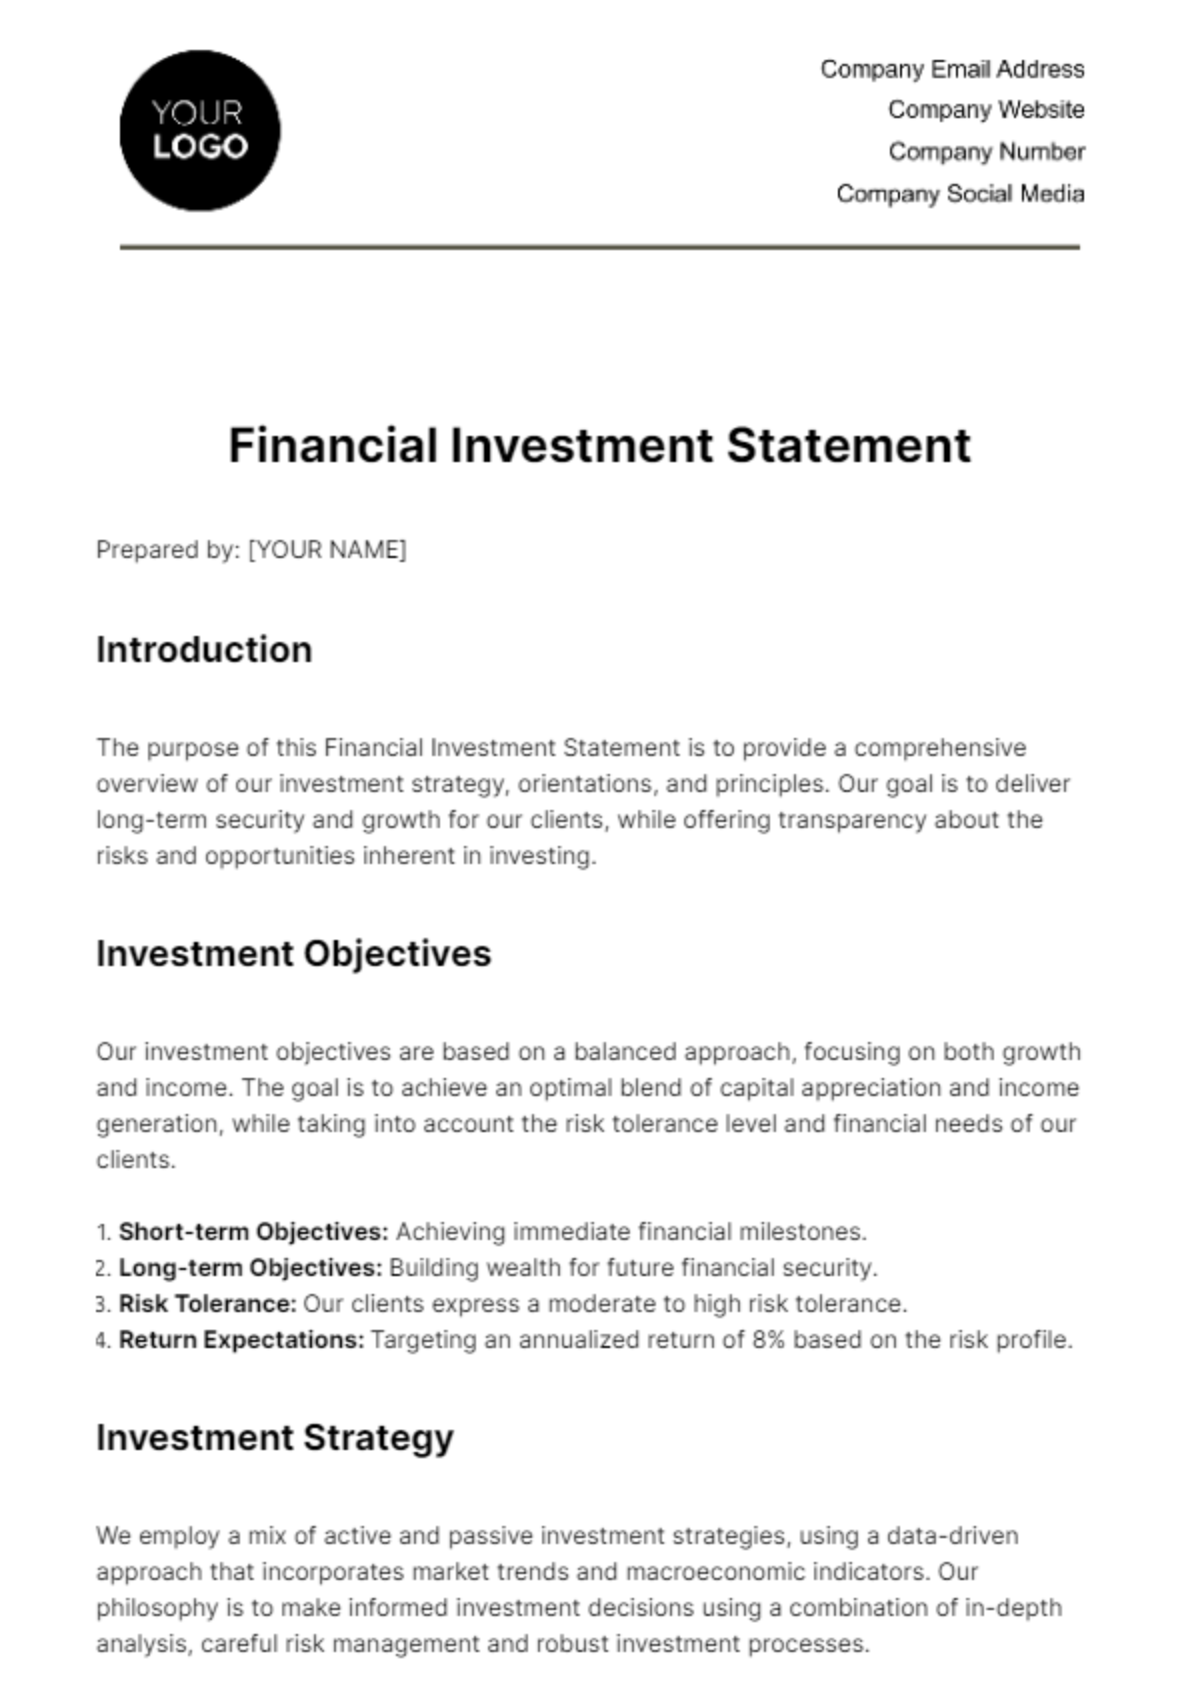 Financial Investment Statement Template